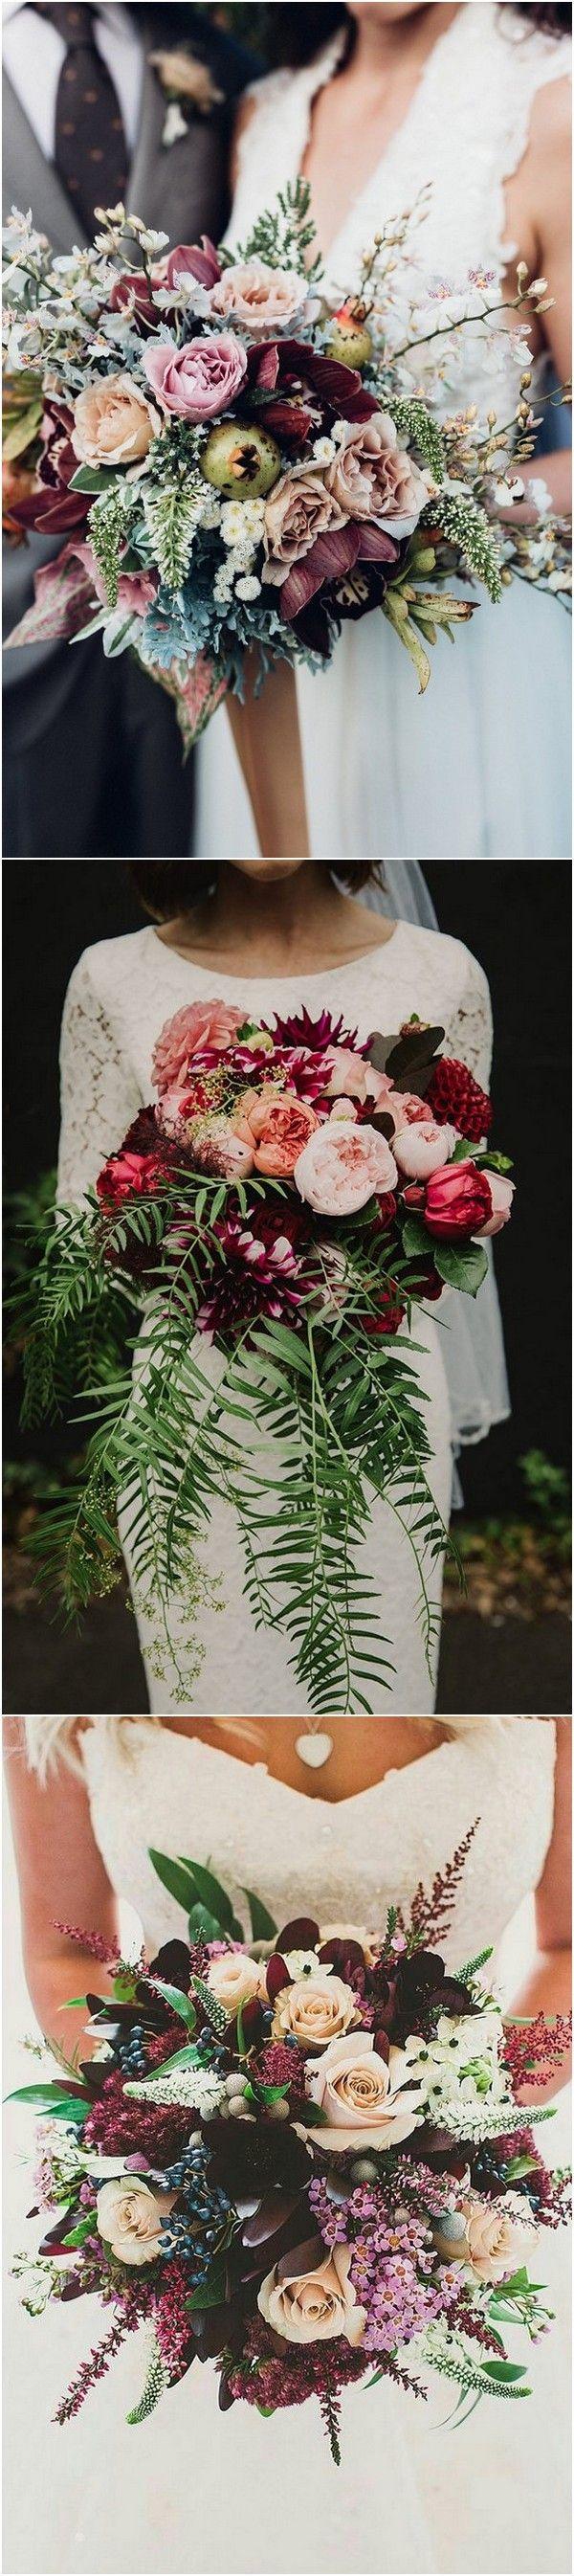 Mariage - Trending-15 Gorgeous Burgundy And Blush Wedding Bouquet Ideas - Page 2 Of 3